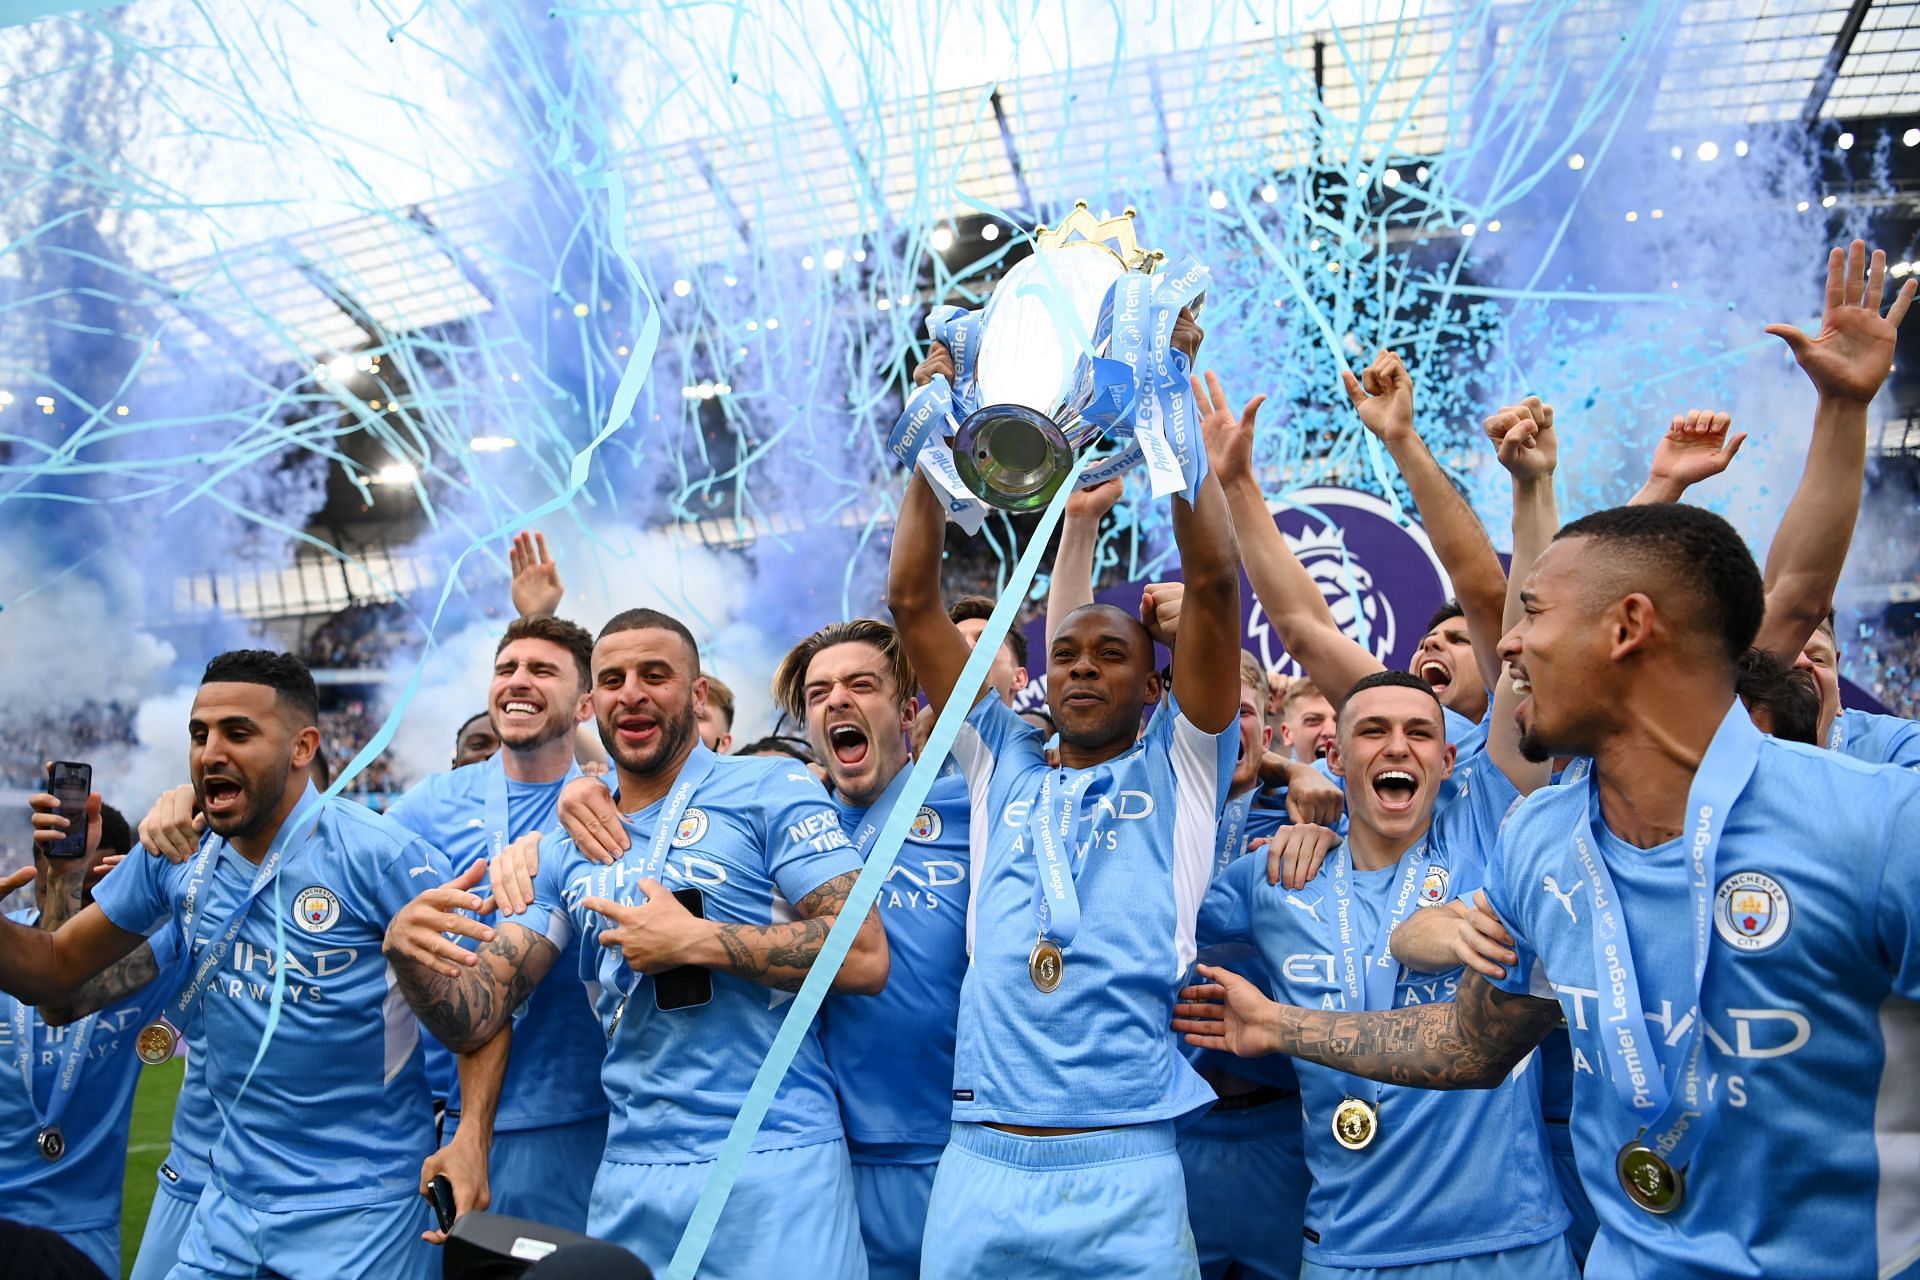 Manchester City successfully defended their league title